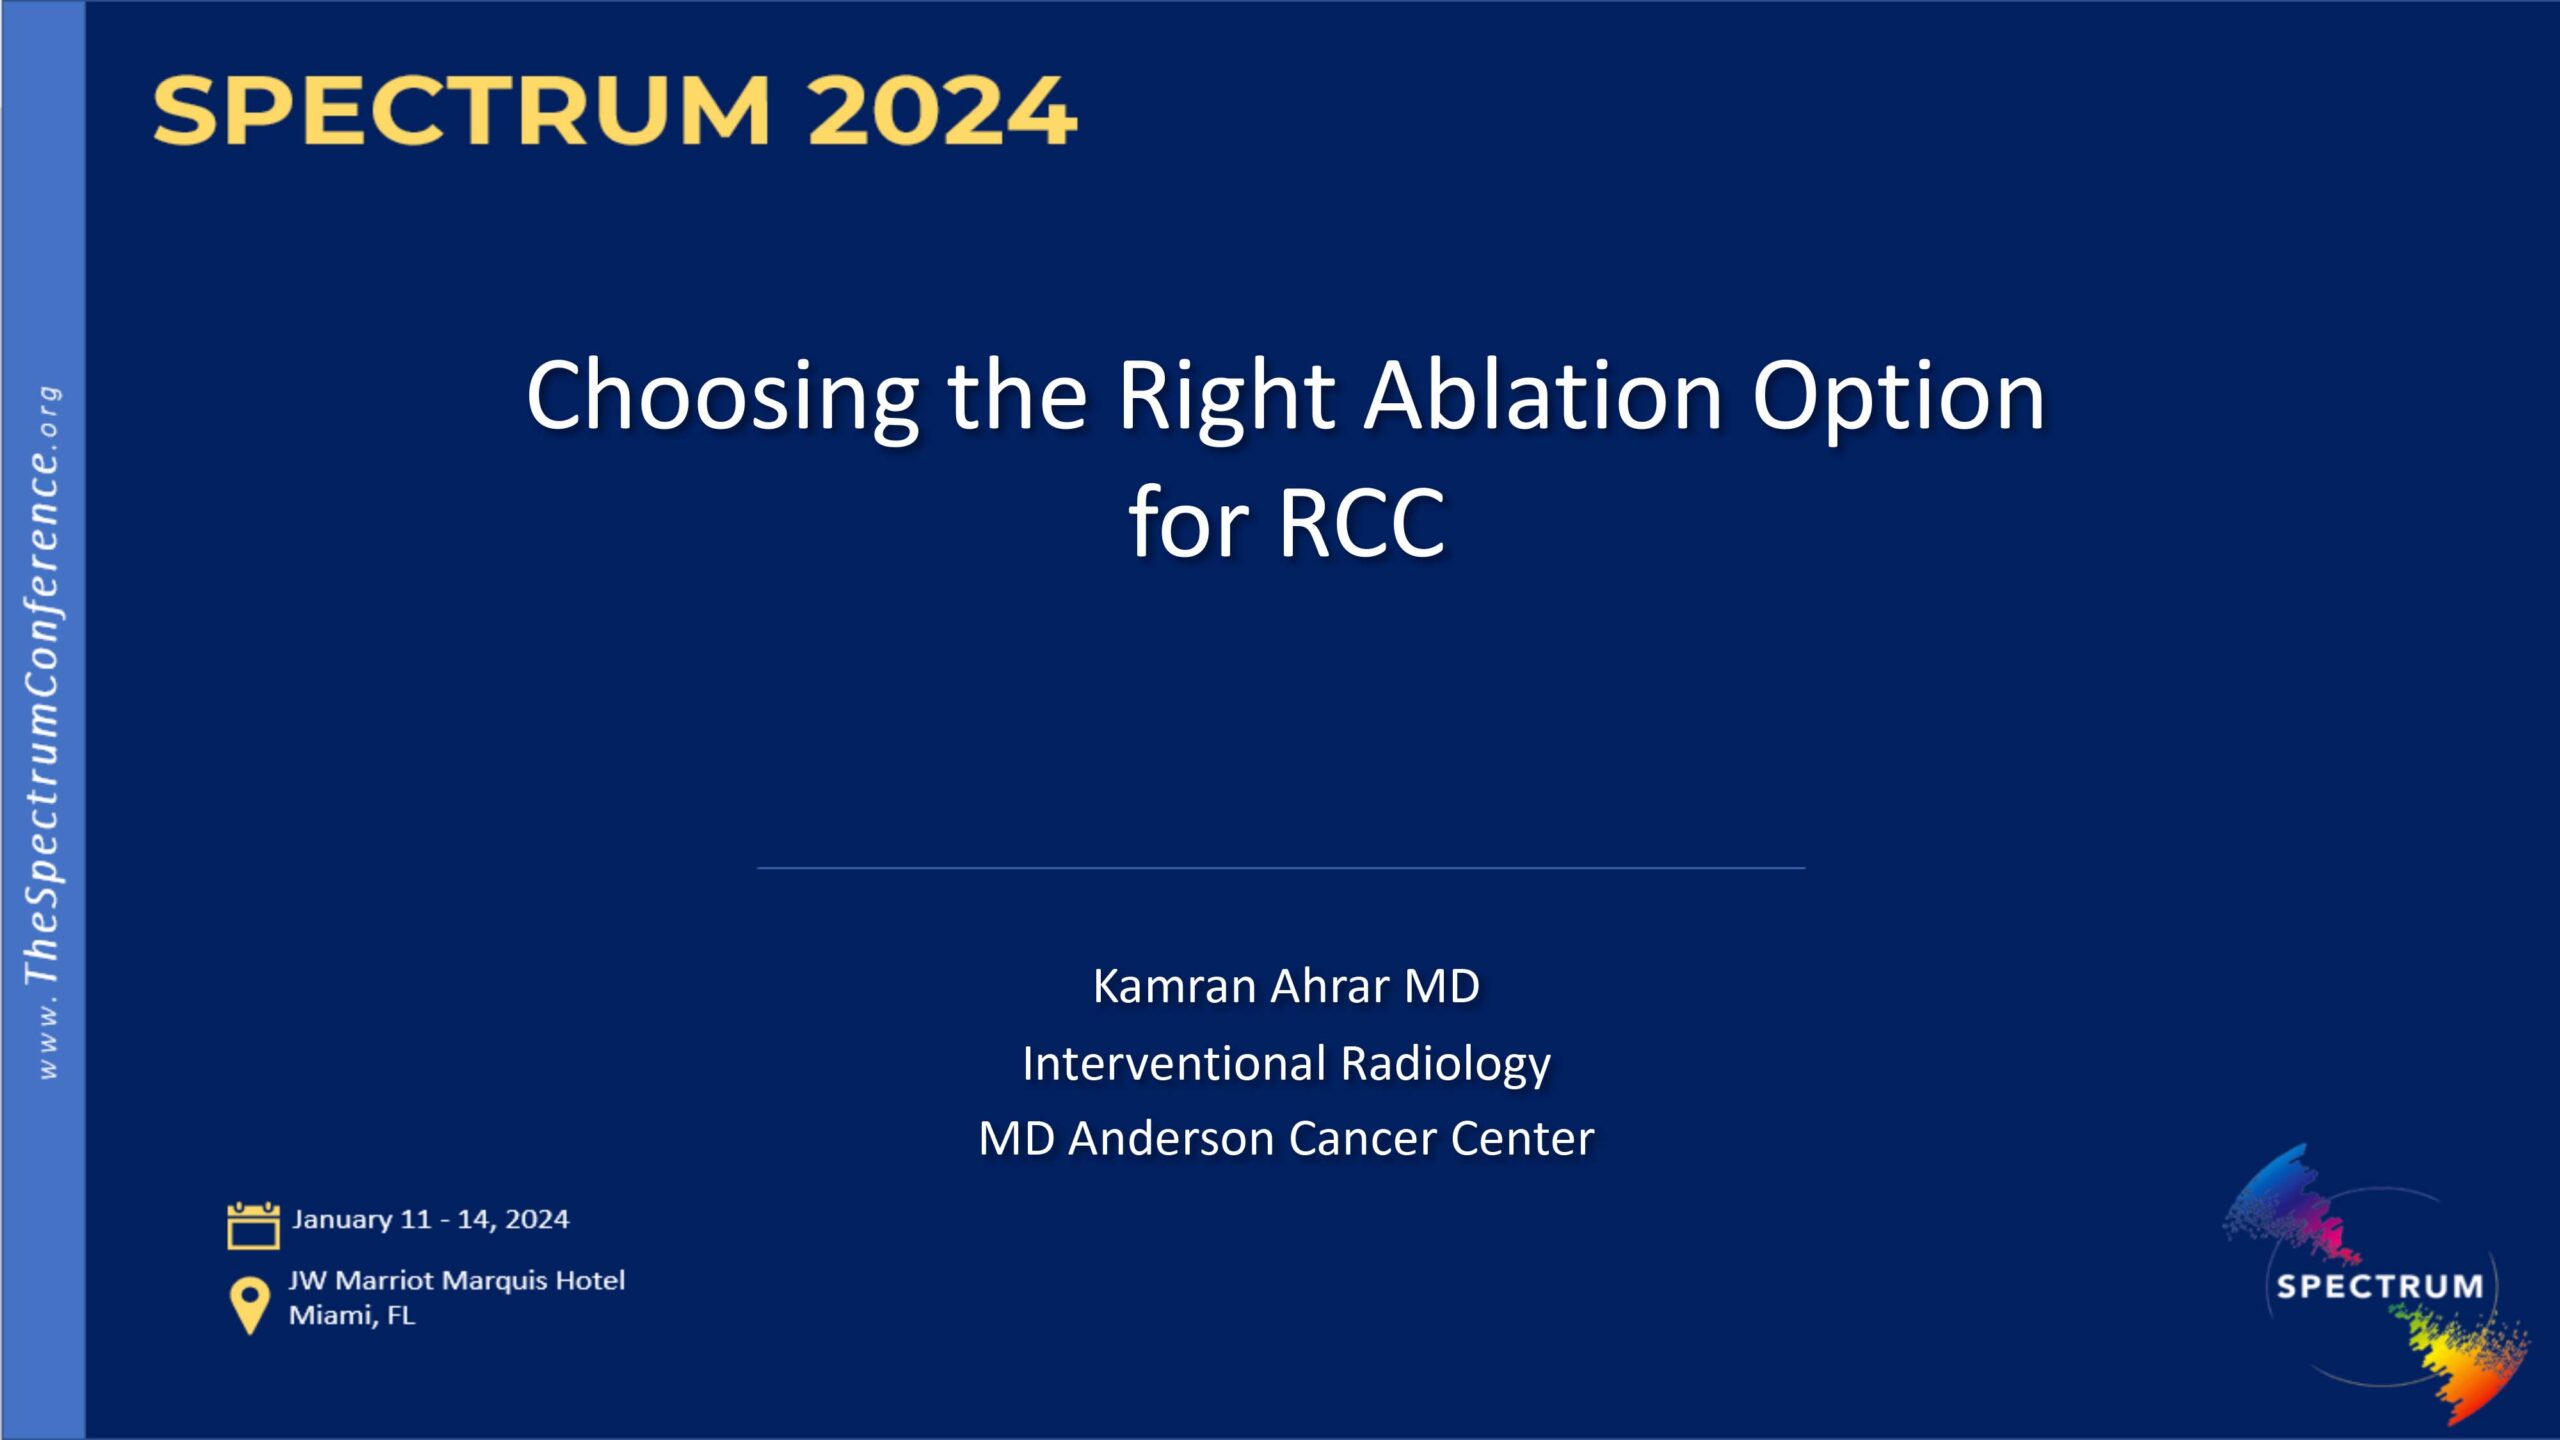 Choosing the right ablation option